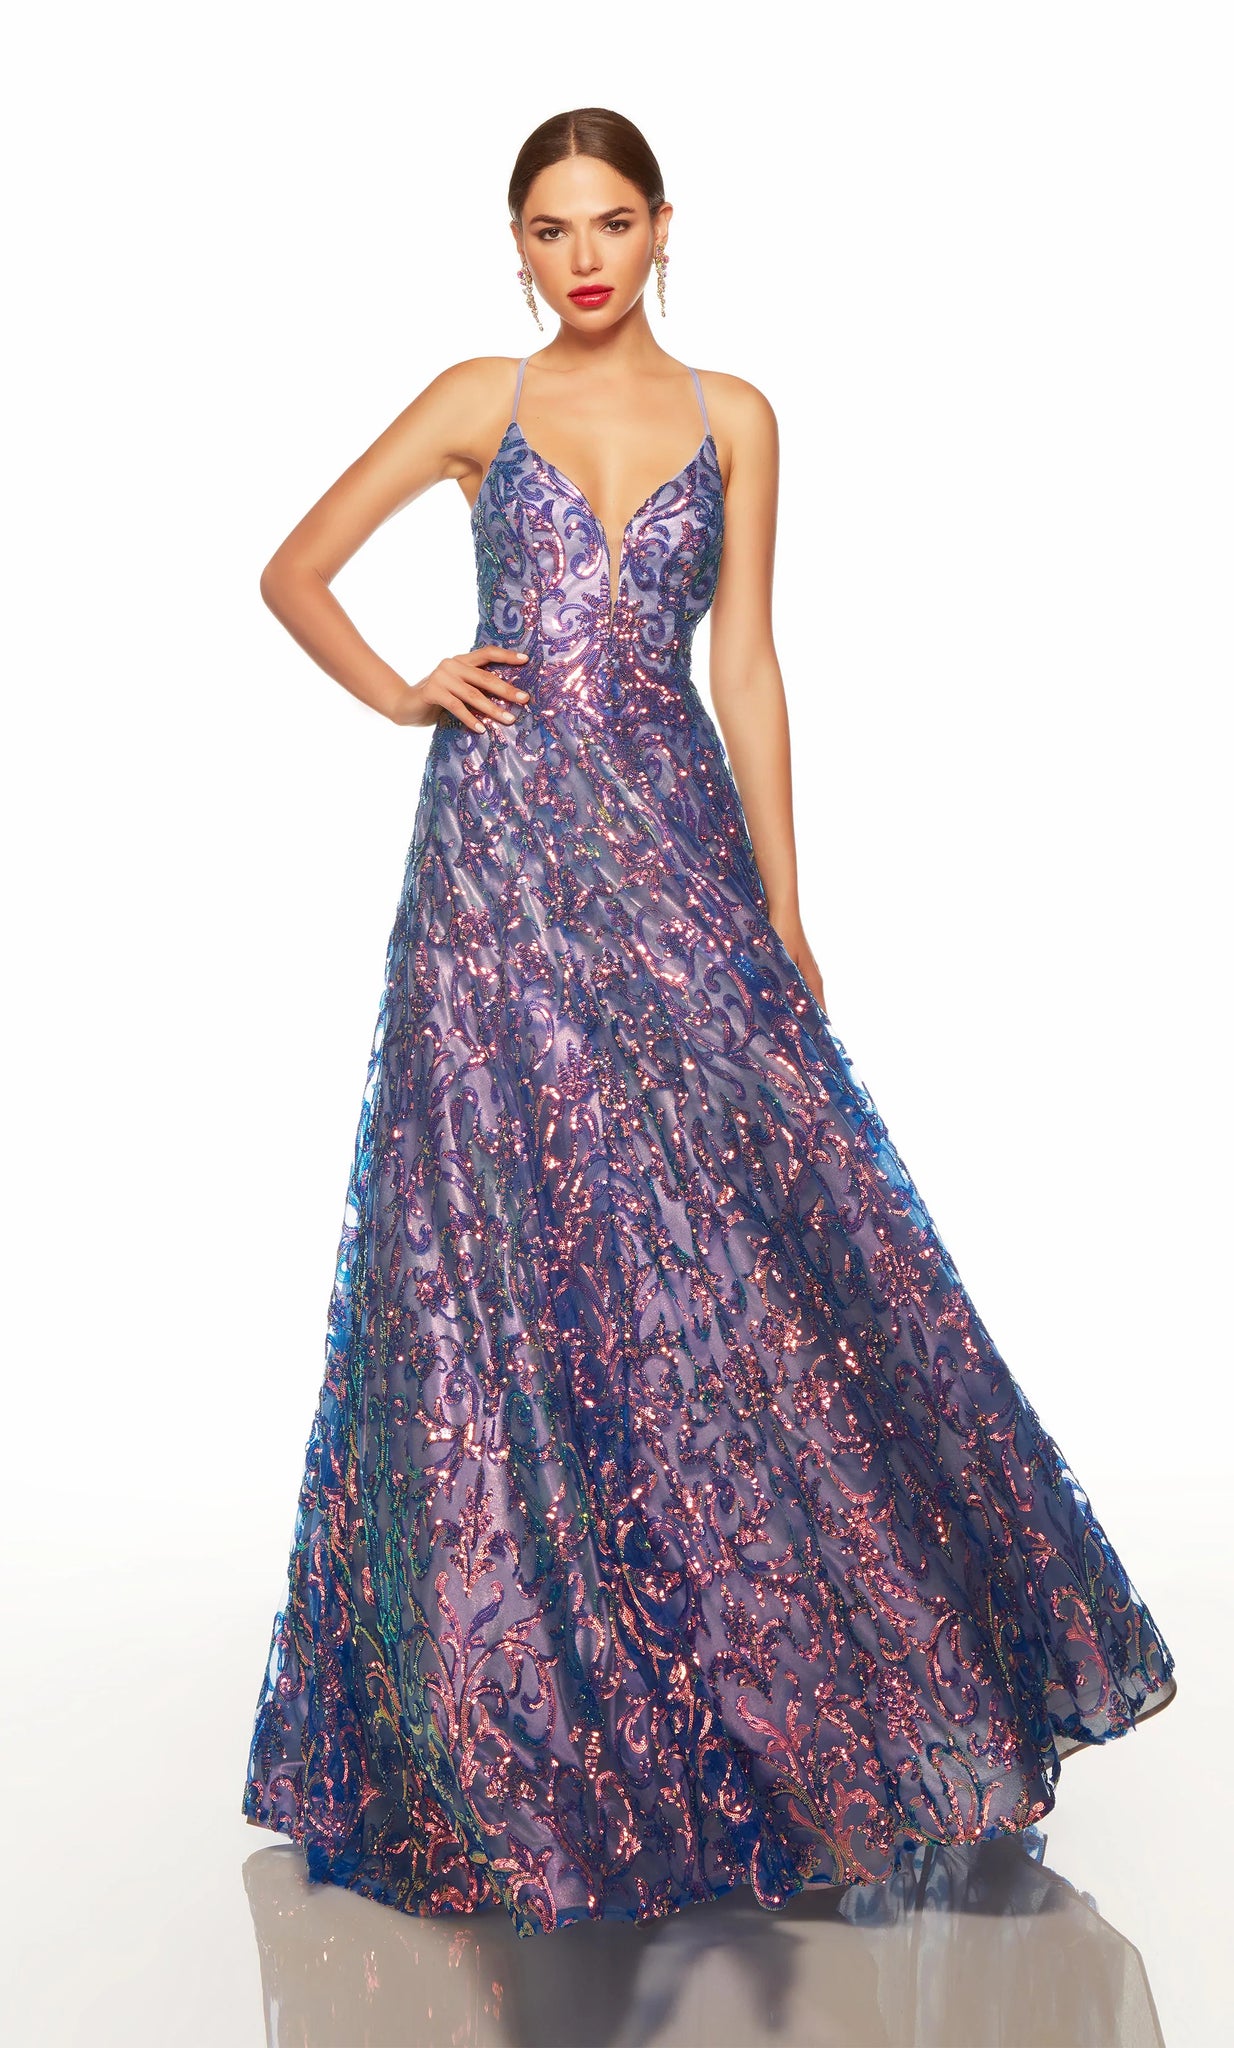 Look like a modern day princess at prom in this stunning long Alyce Paris long dress 61291 embellished with shimmering sequins throughout. This glamorous gown showcases a fitted V neckline bodice with illusion insert, spaghetti straps and open lace up tie back. The long a line skirt flows beautifully to the floor.